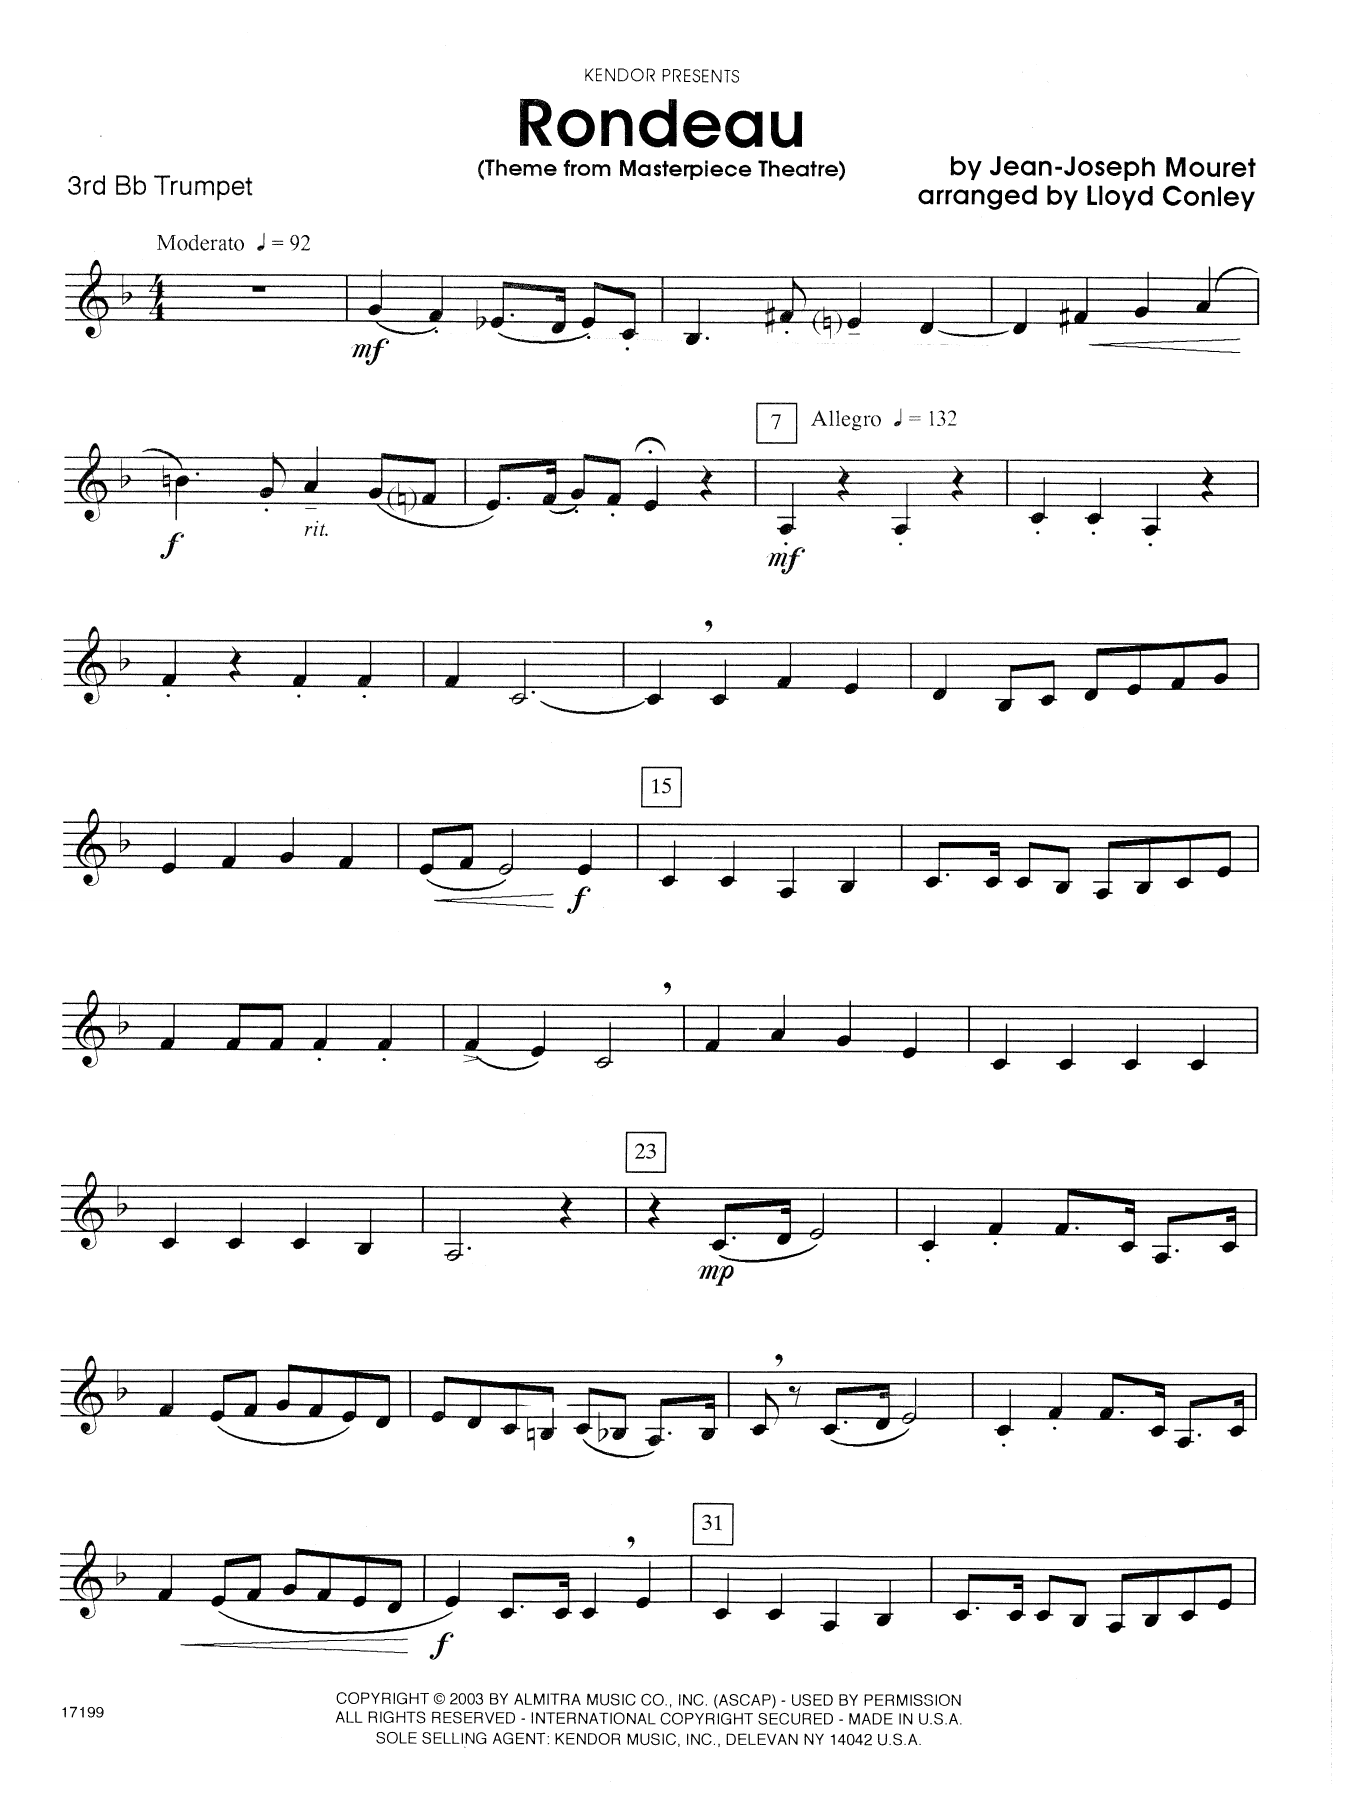 Lloyd Conley Rondeau (Theme From Masterpiece Theatre) - 3rd Bb Trumpet sheet music notes and chords. Download Printable PDF.